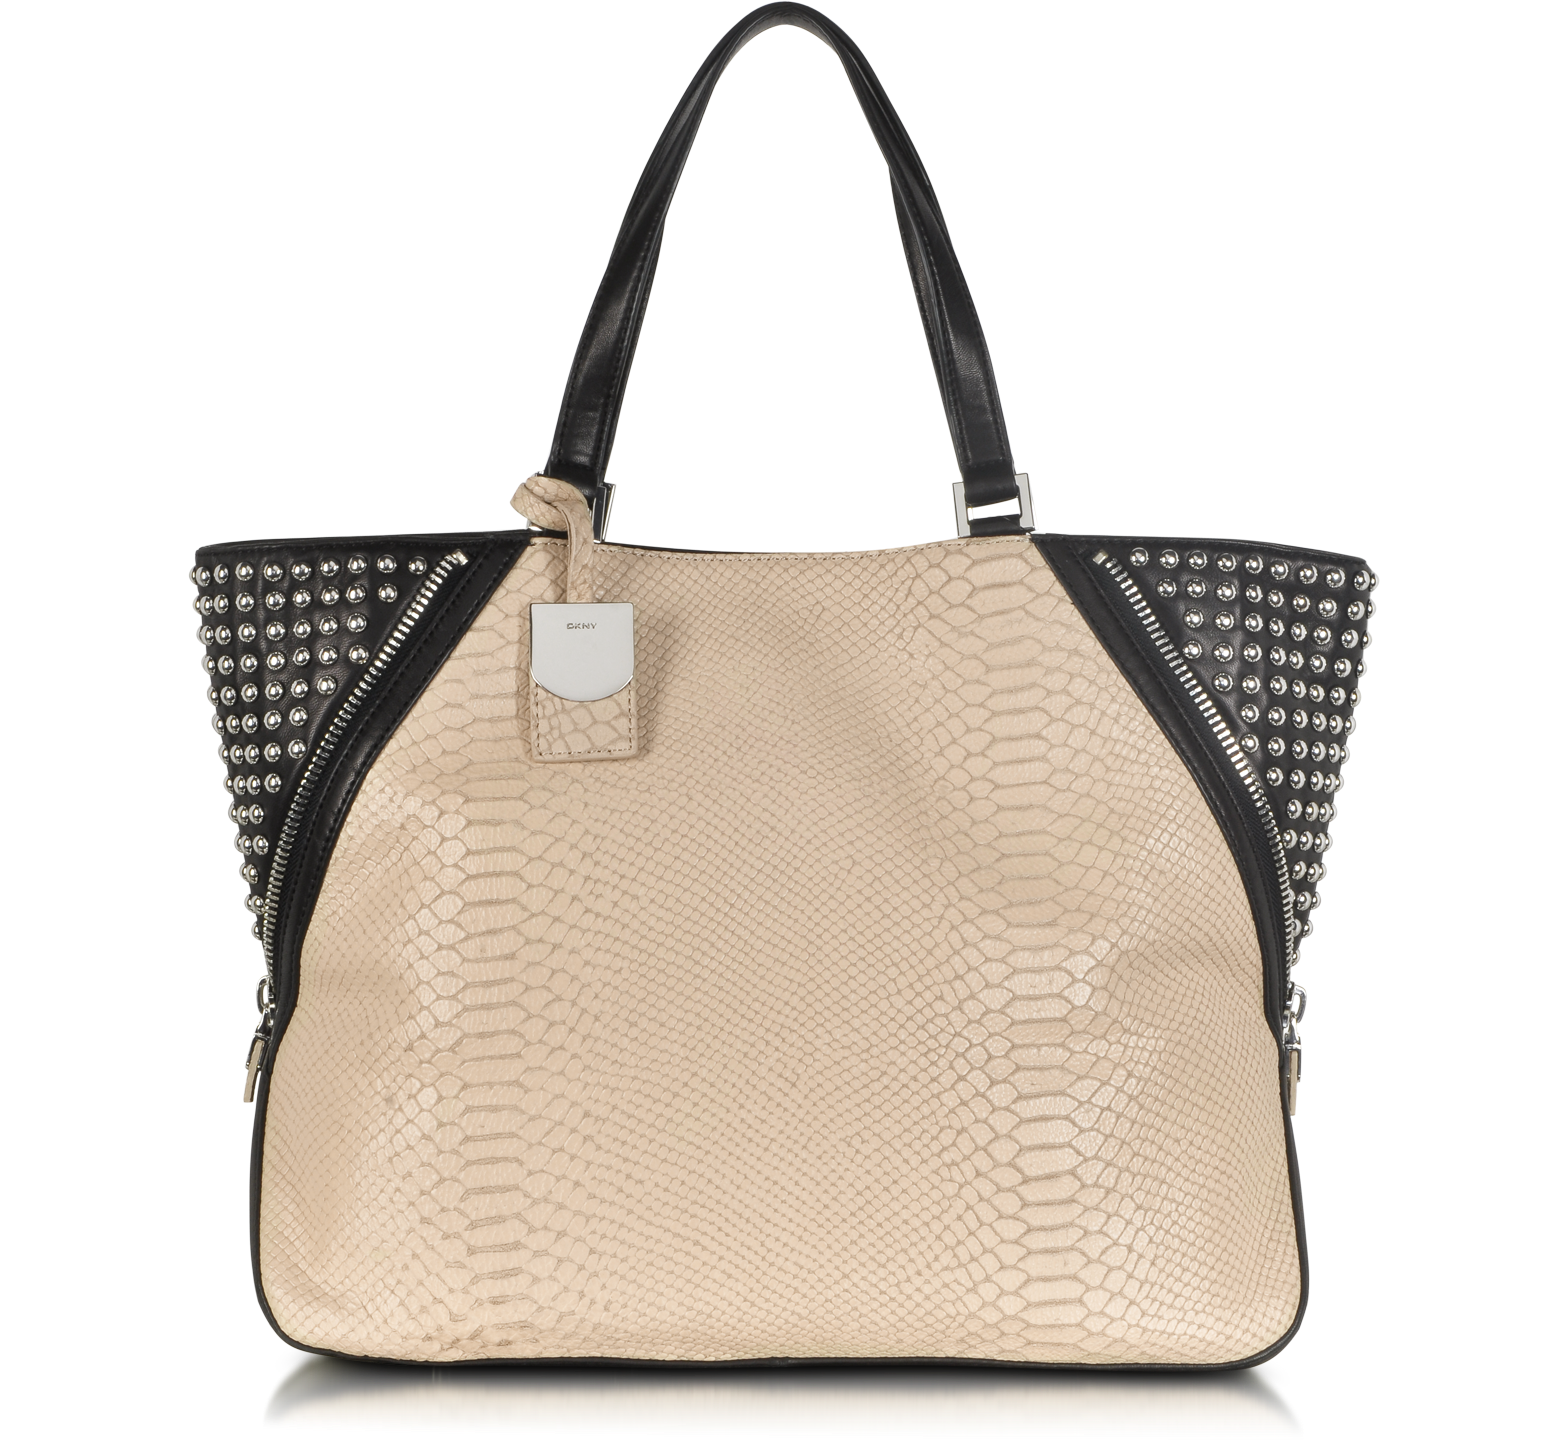 DKNY Python Printed Leather Large Zip Tote with Studs at FORZIERI